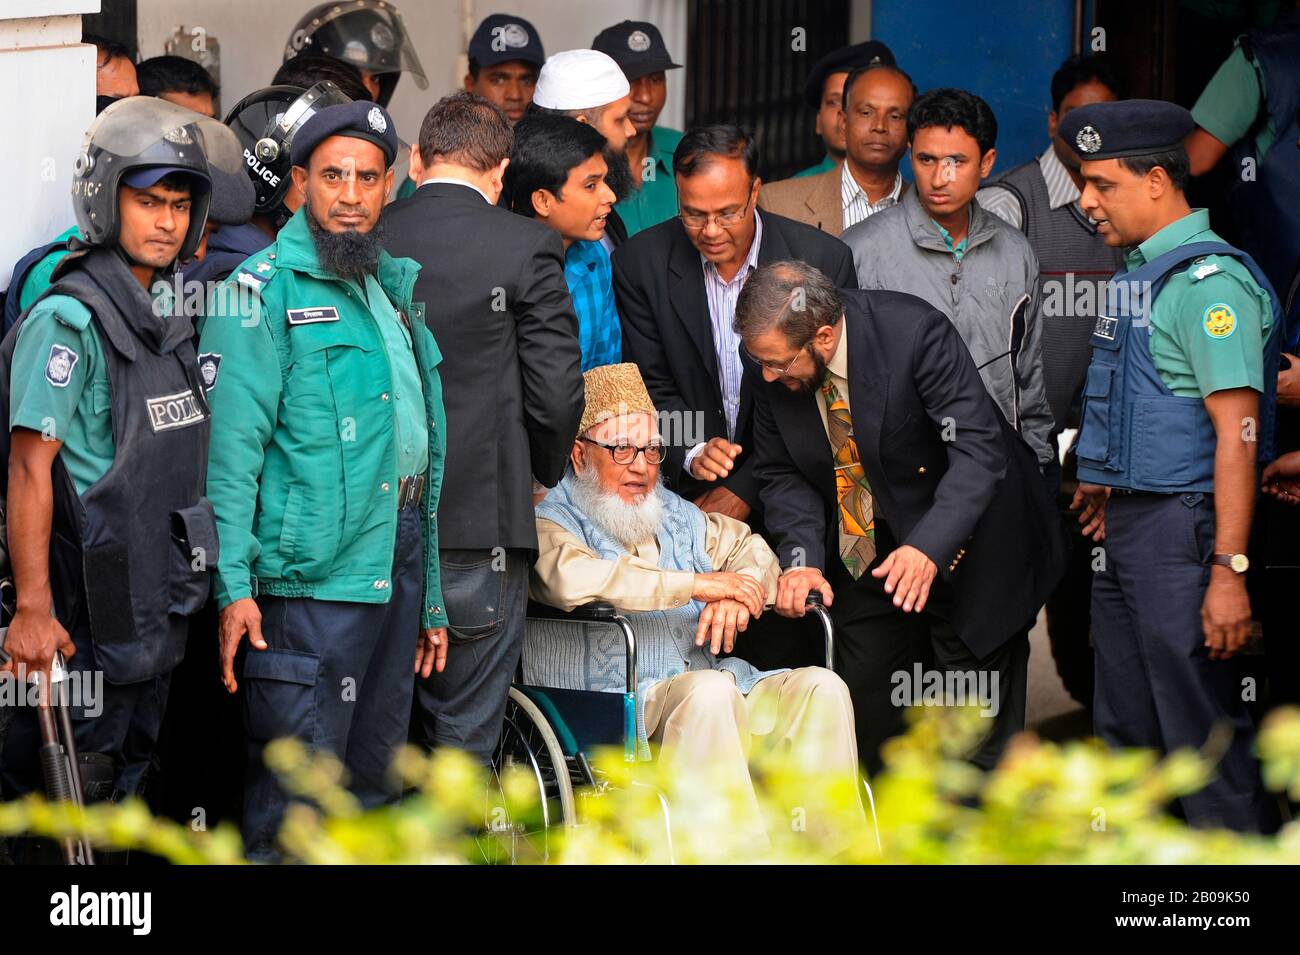 Police officers help former Jamaat-e-Islami chief Ghulam Azam, in a wheelchair, to get on board a prison van as he exits the Bangladesh International Crimes Tribunal. His bail plea was rejected by a special tribunal that sentenced him with imprisonment pending trial on charges committed against humanity during the liberation war of 1971. Dhaka, Bangladesh. January 11, 2012. Stock Photo